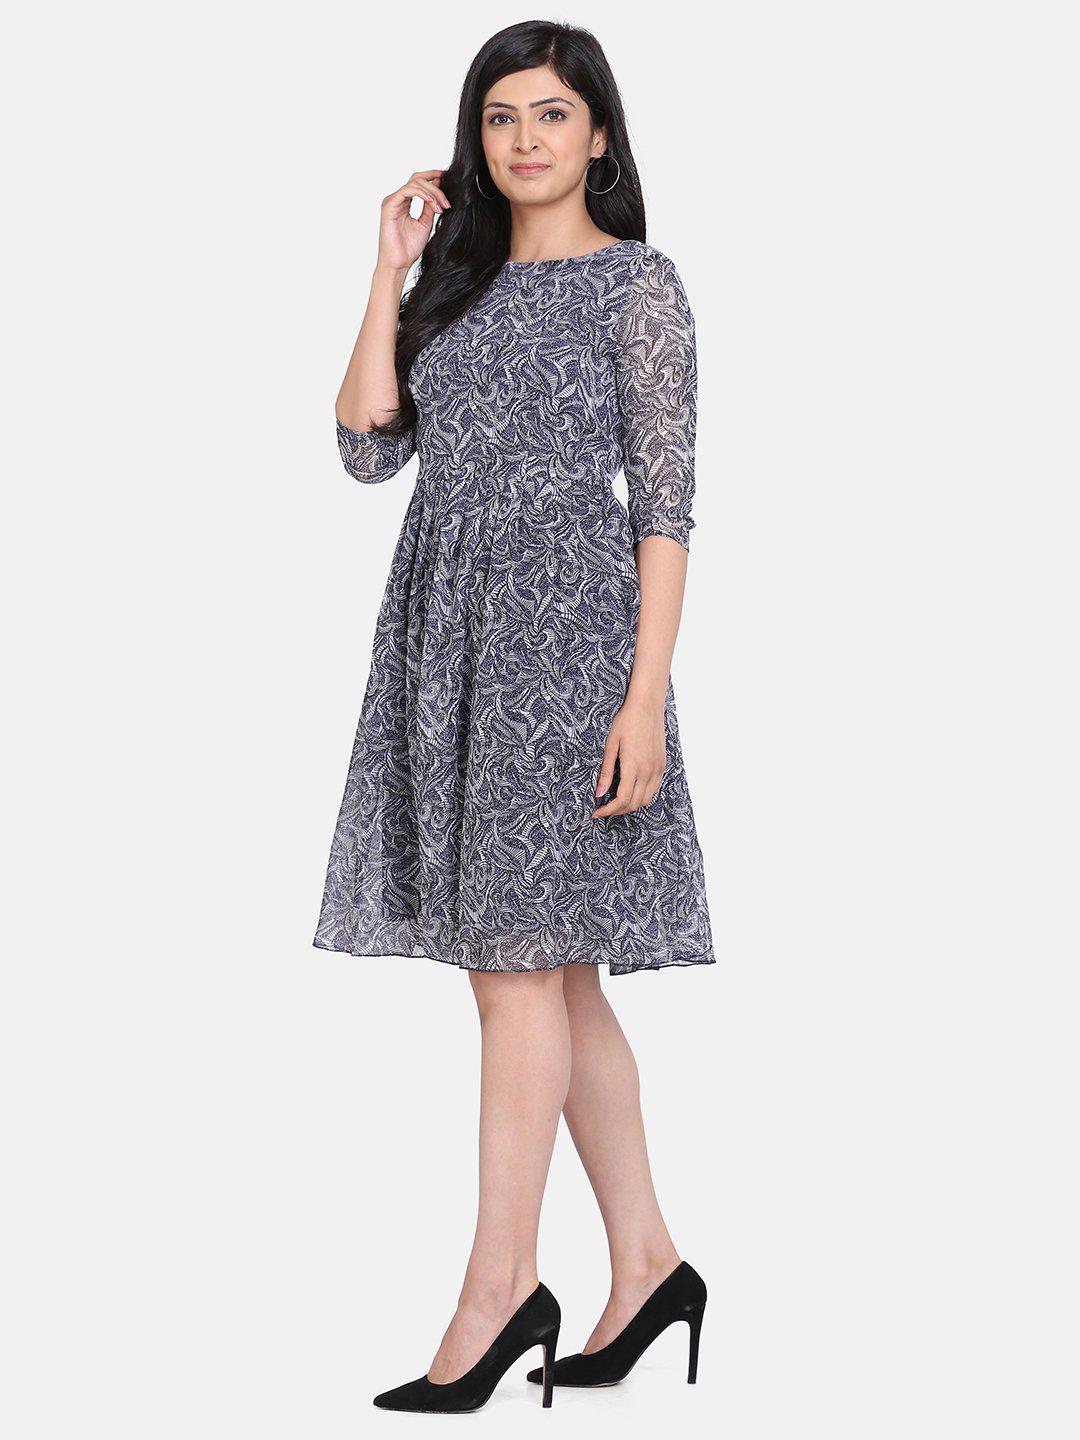 Print Georgette Outdoor Dress For Women - White and Grey